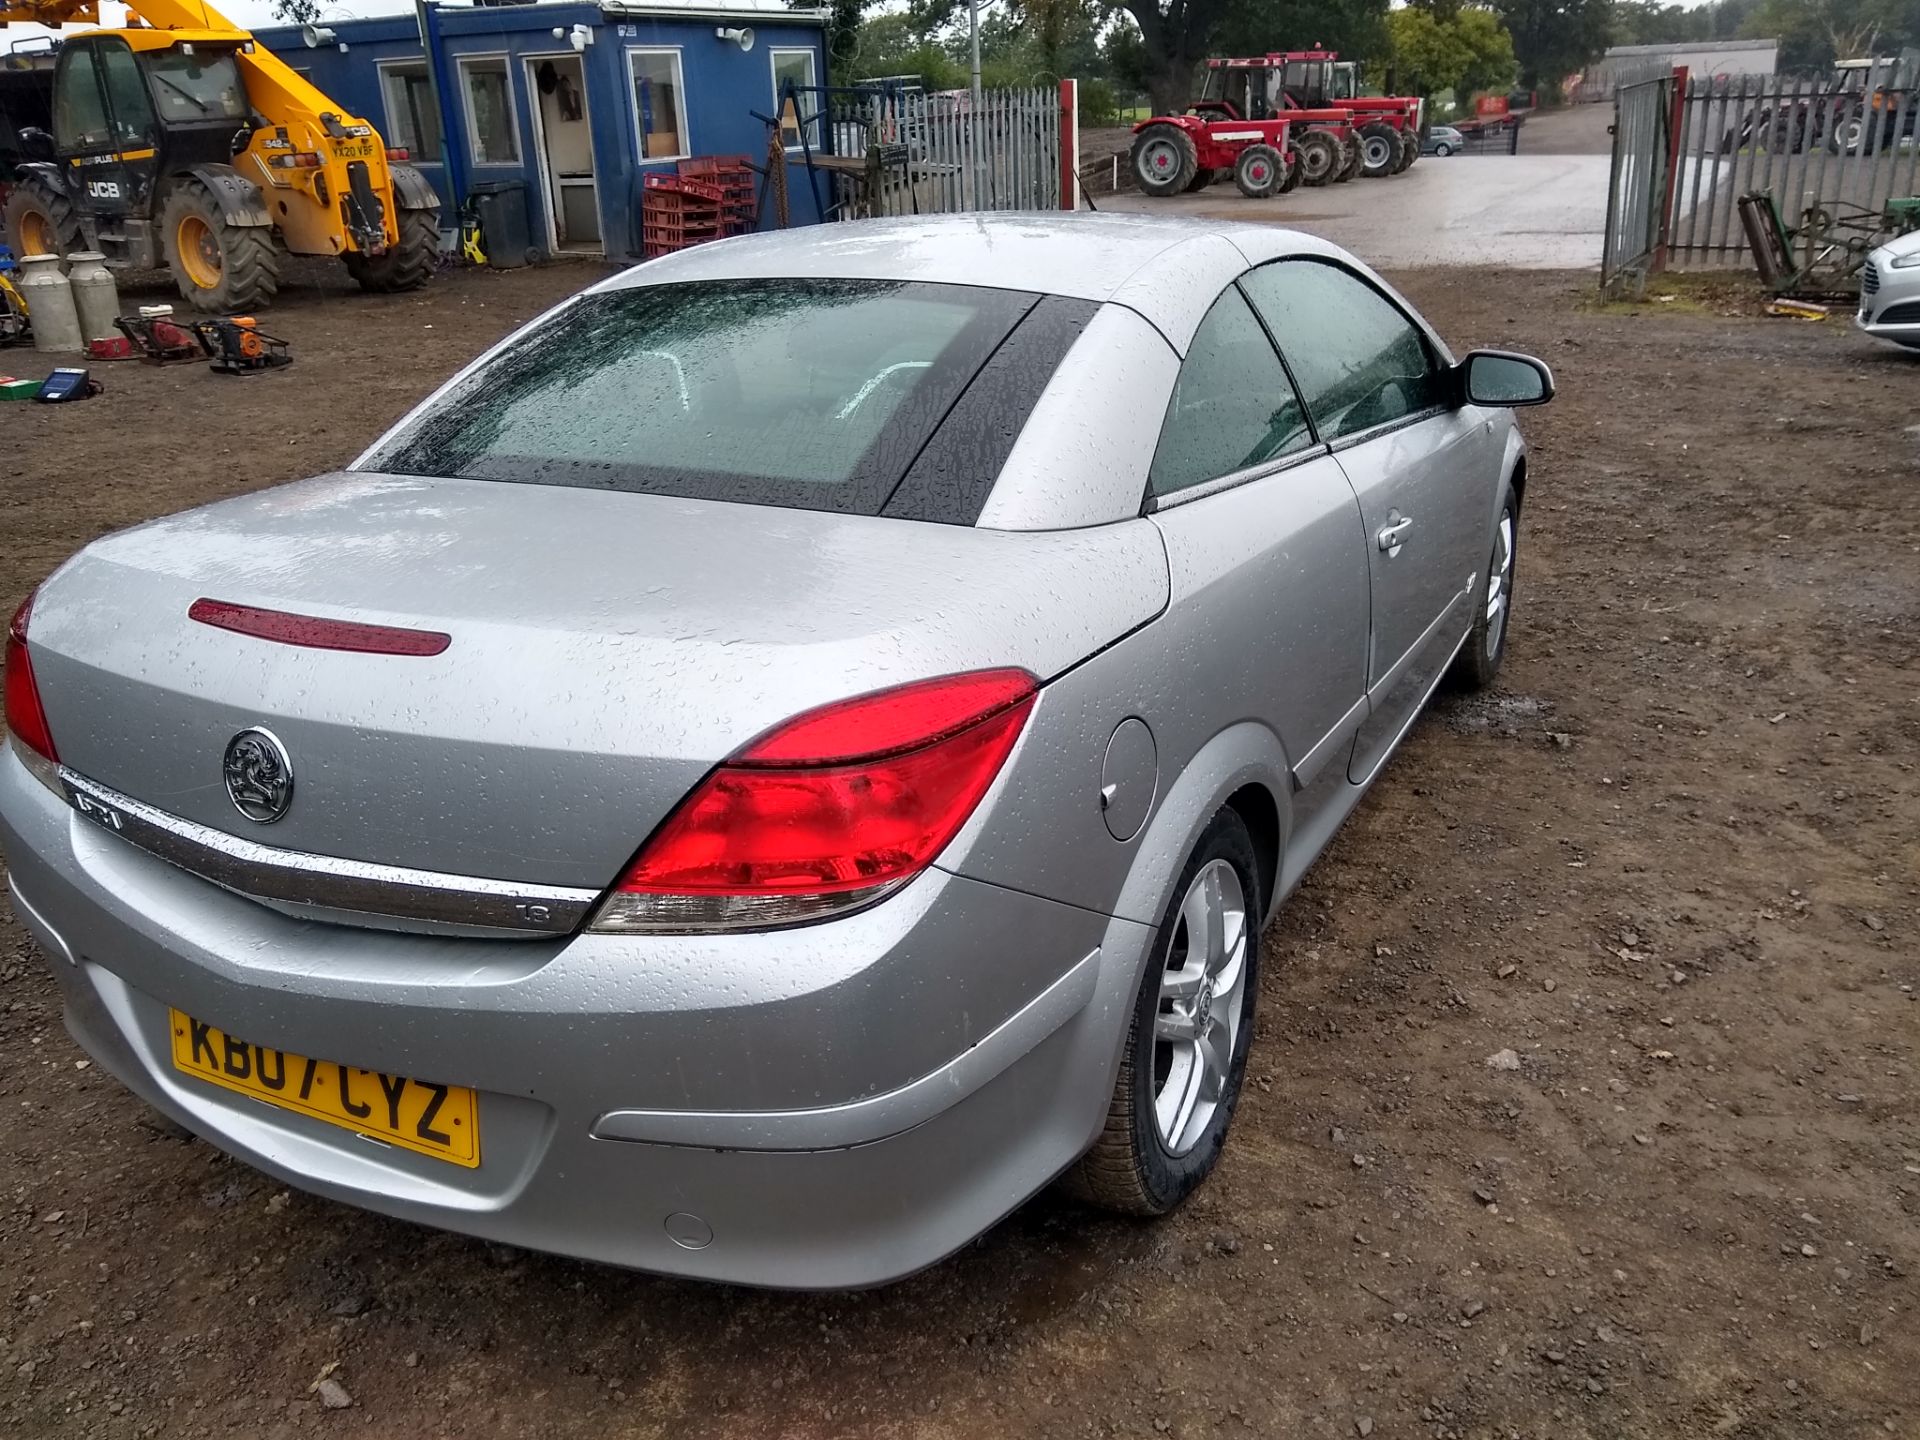 2007 Vauxhall Astra Convertible KB07CYZ 2007 Vauxhall Astra 1.8 Twin Top Convertible, MOT EXP - 00's - Image 7 of 10